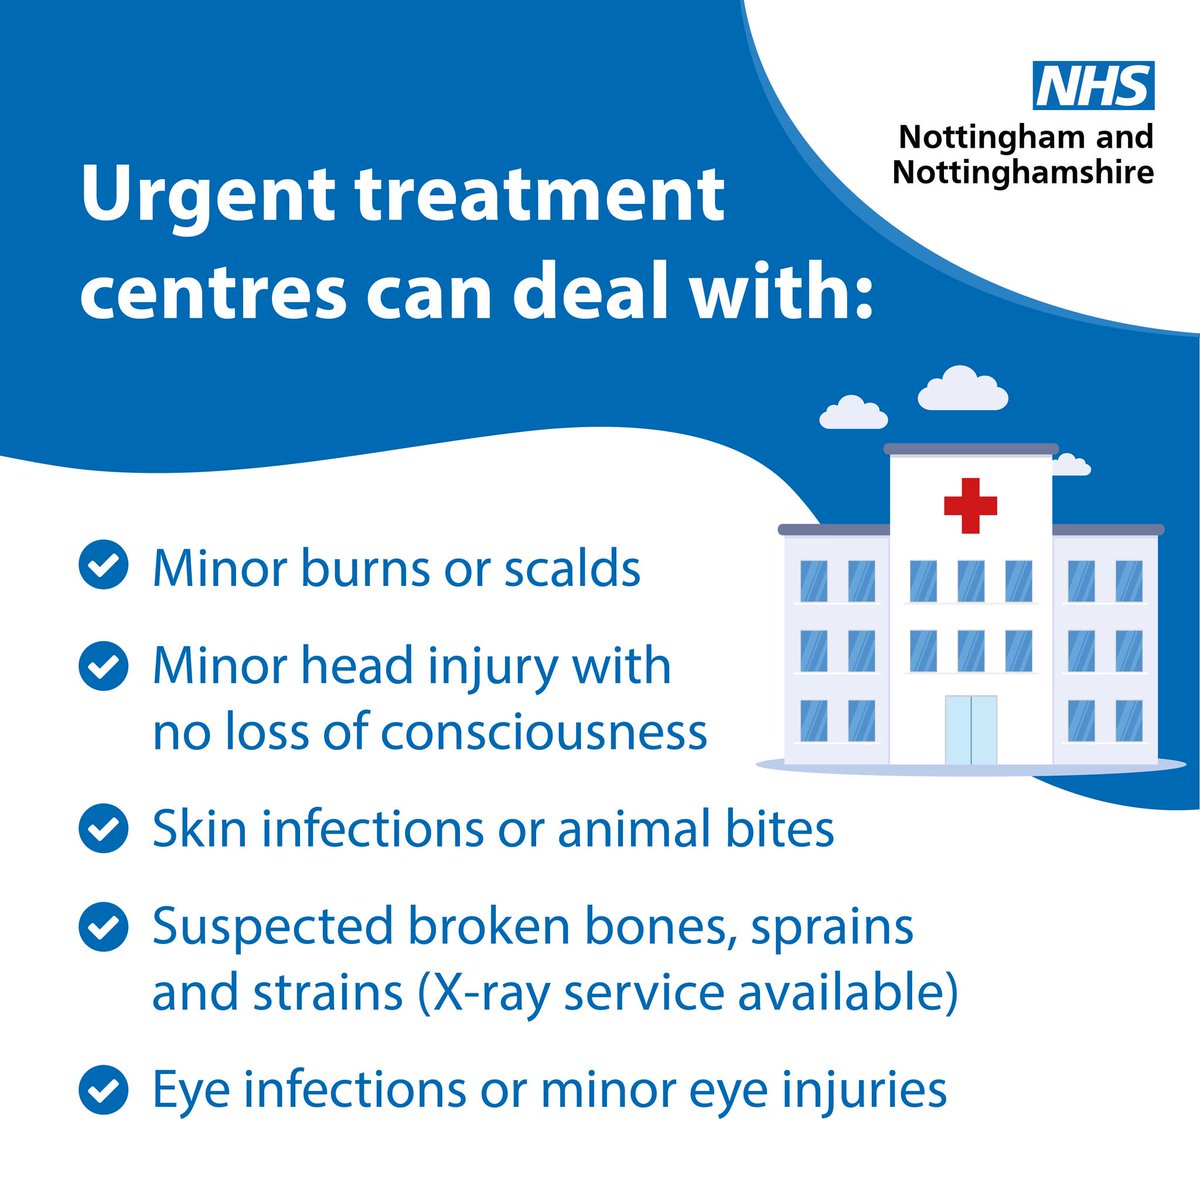 If you need urgent medical help, 111 Online will direct you to the right place for you, like an Urgent Treatment Centre. Did you know your Urgent Treatment Centres are open over the weekend and can treat a range of conditions?